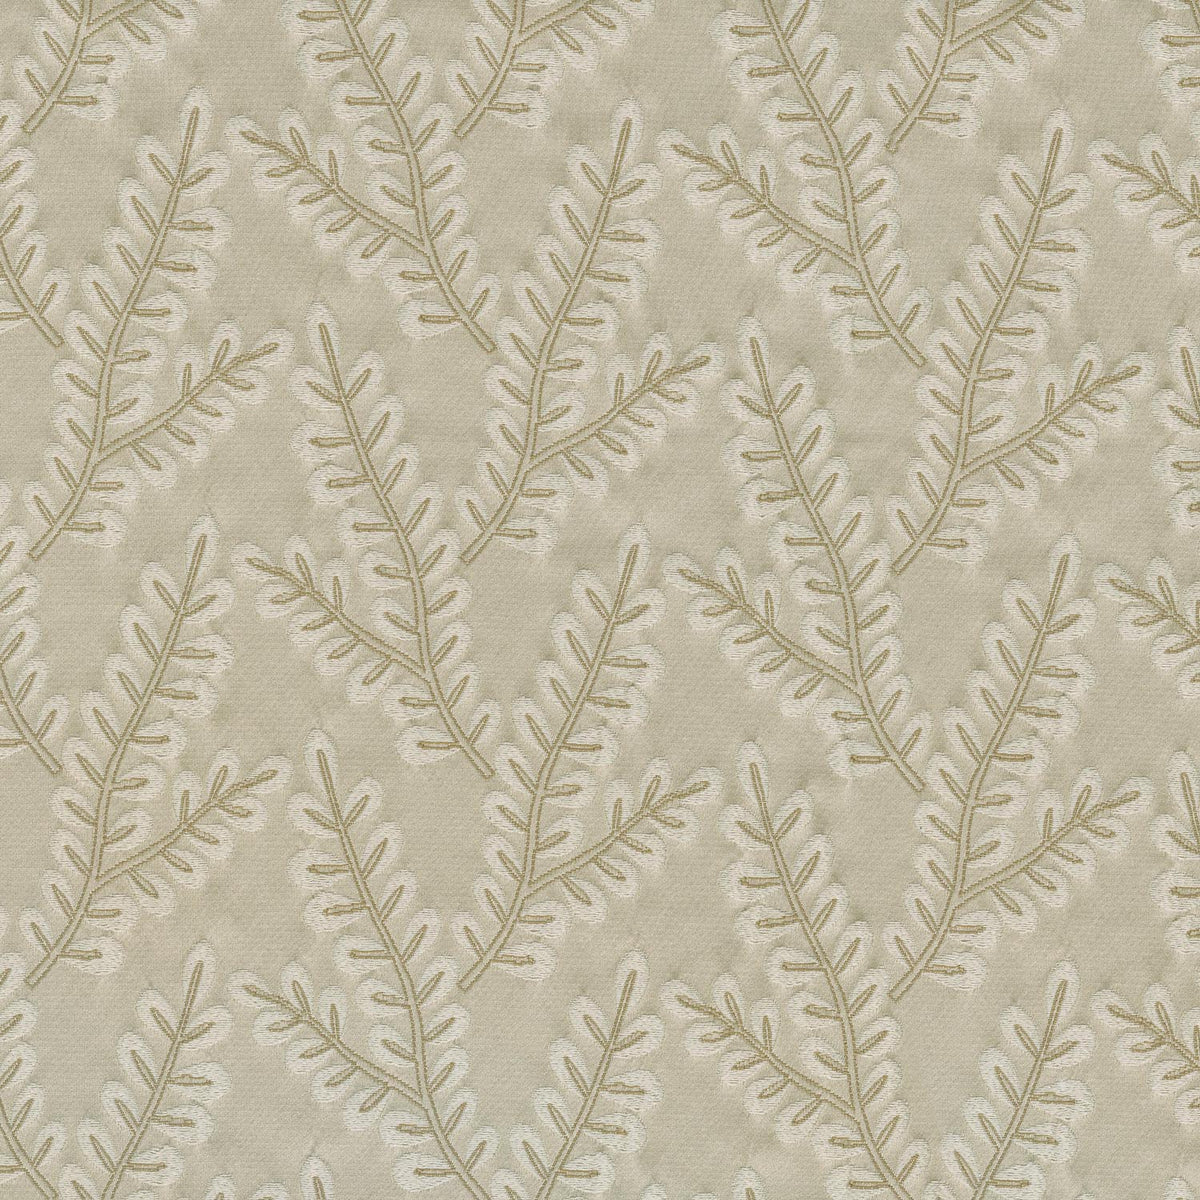 P/K Lifestyles Delphine - Champagne 410031 Fabric Swatch